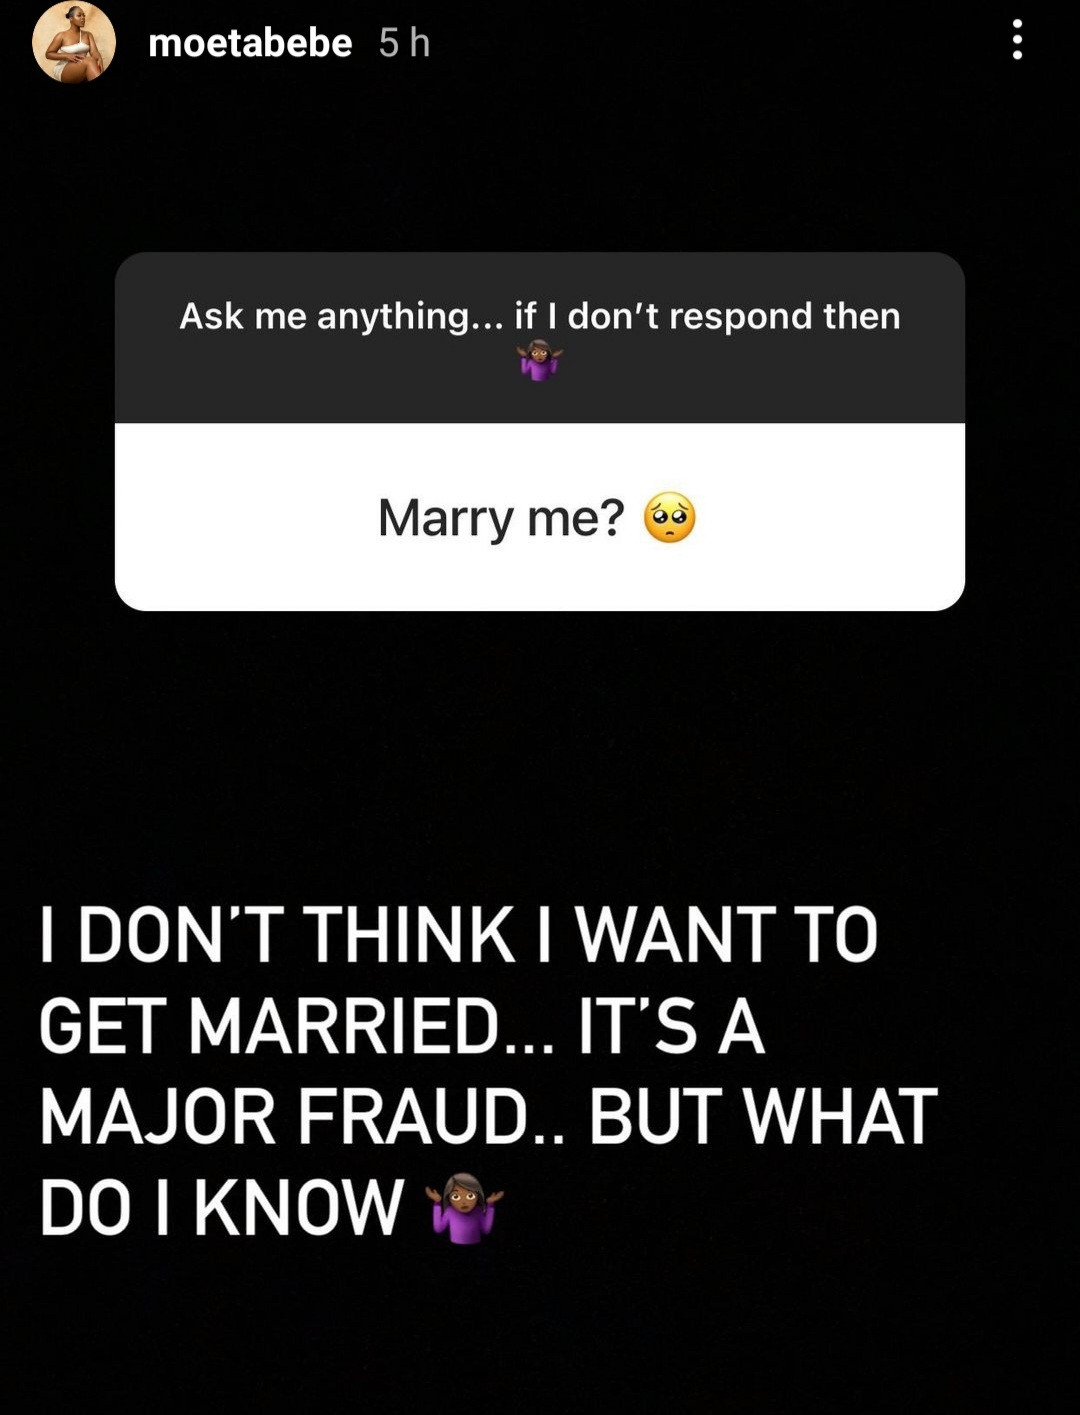 "I dont think I want to get married. It's a major fraud" Media personality, Moet Abebe says as she reveals what she's in a relationship with